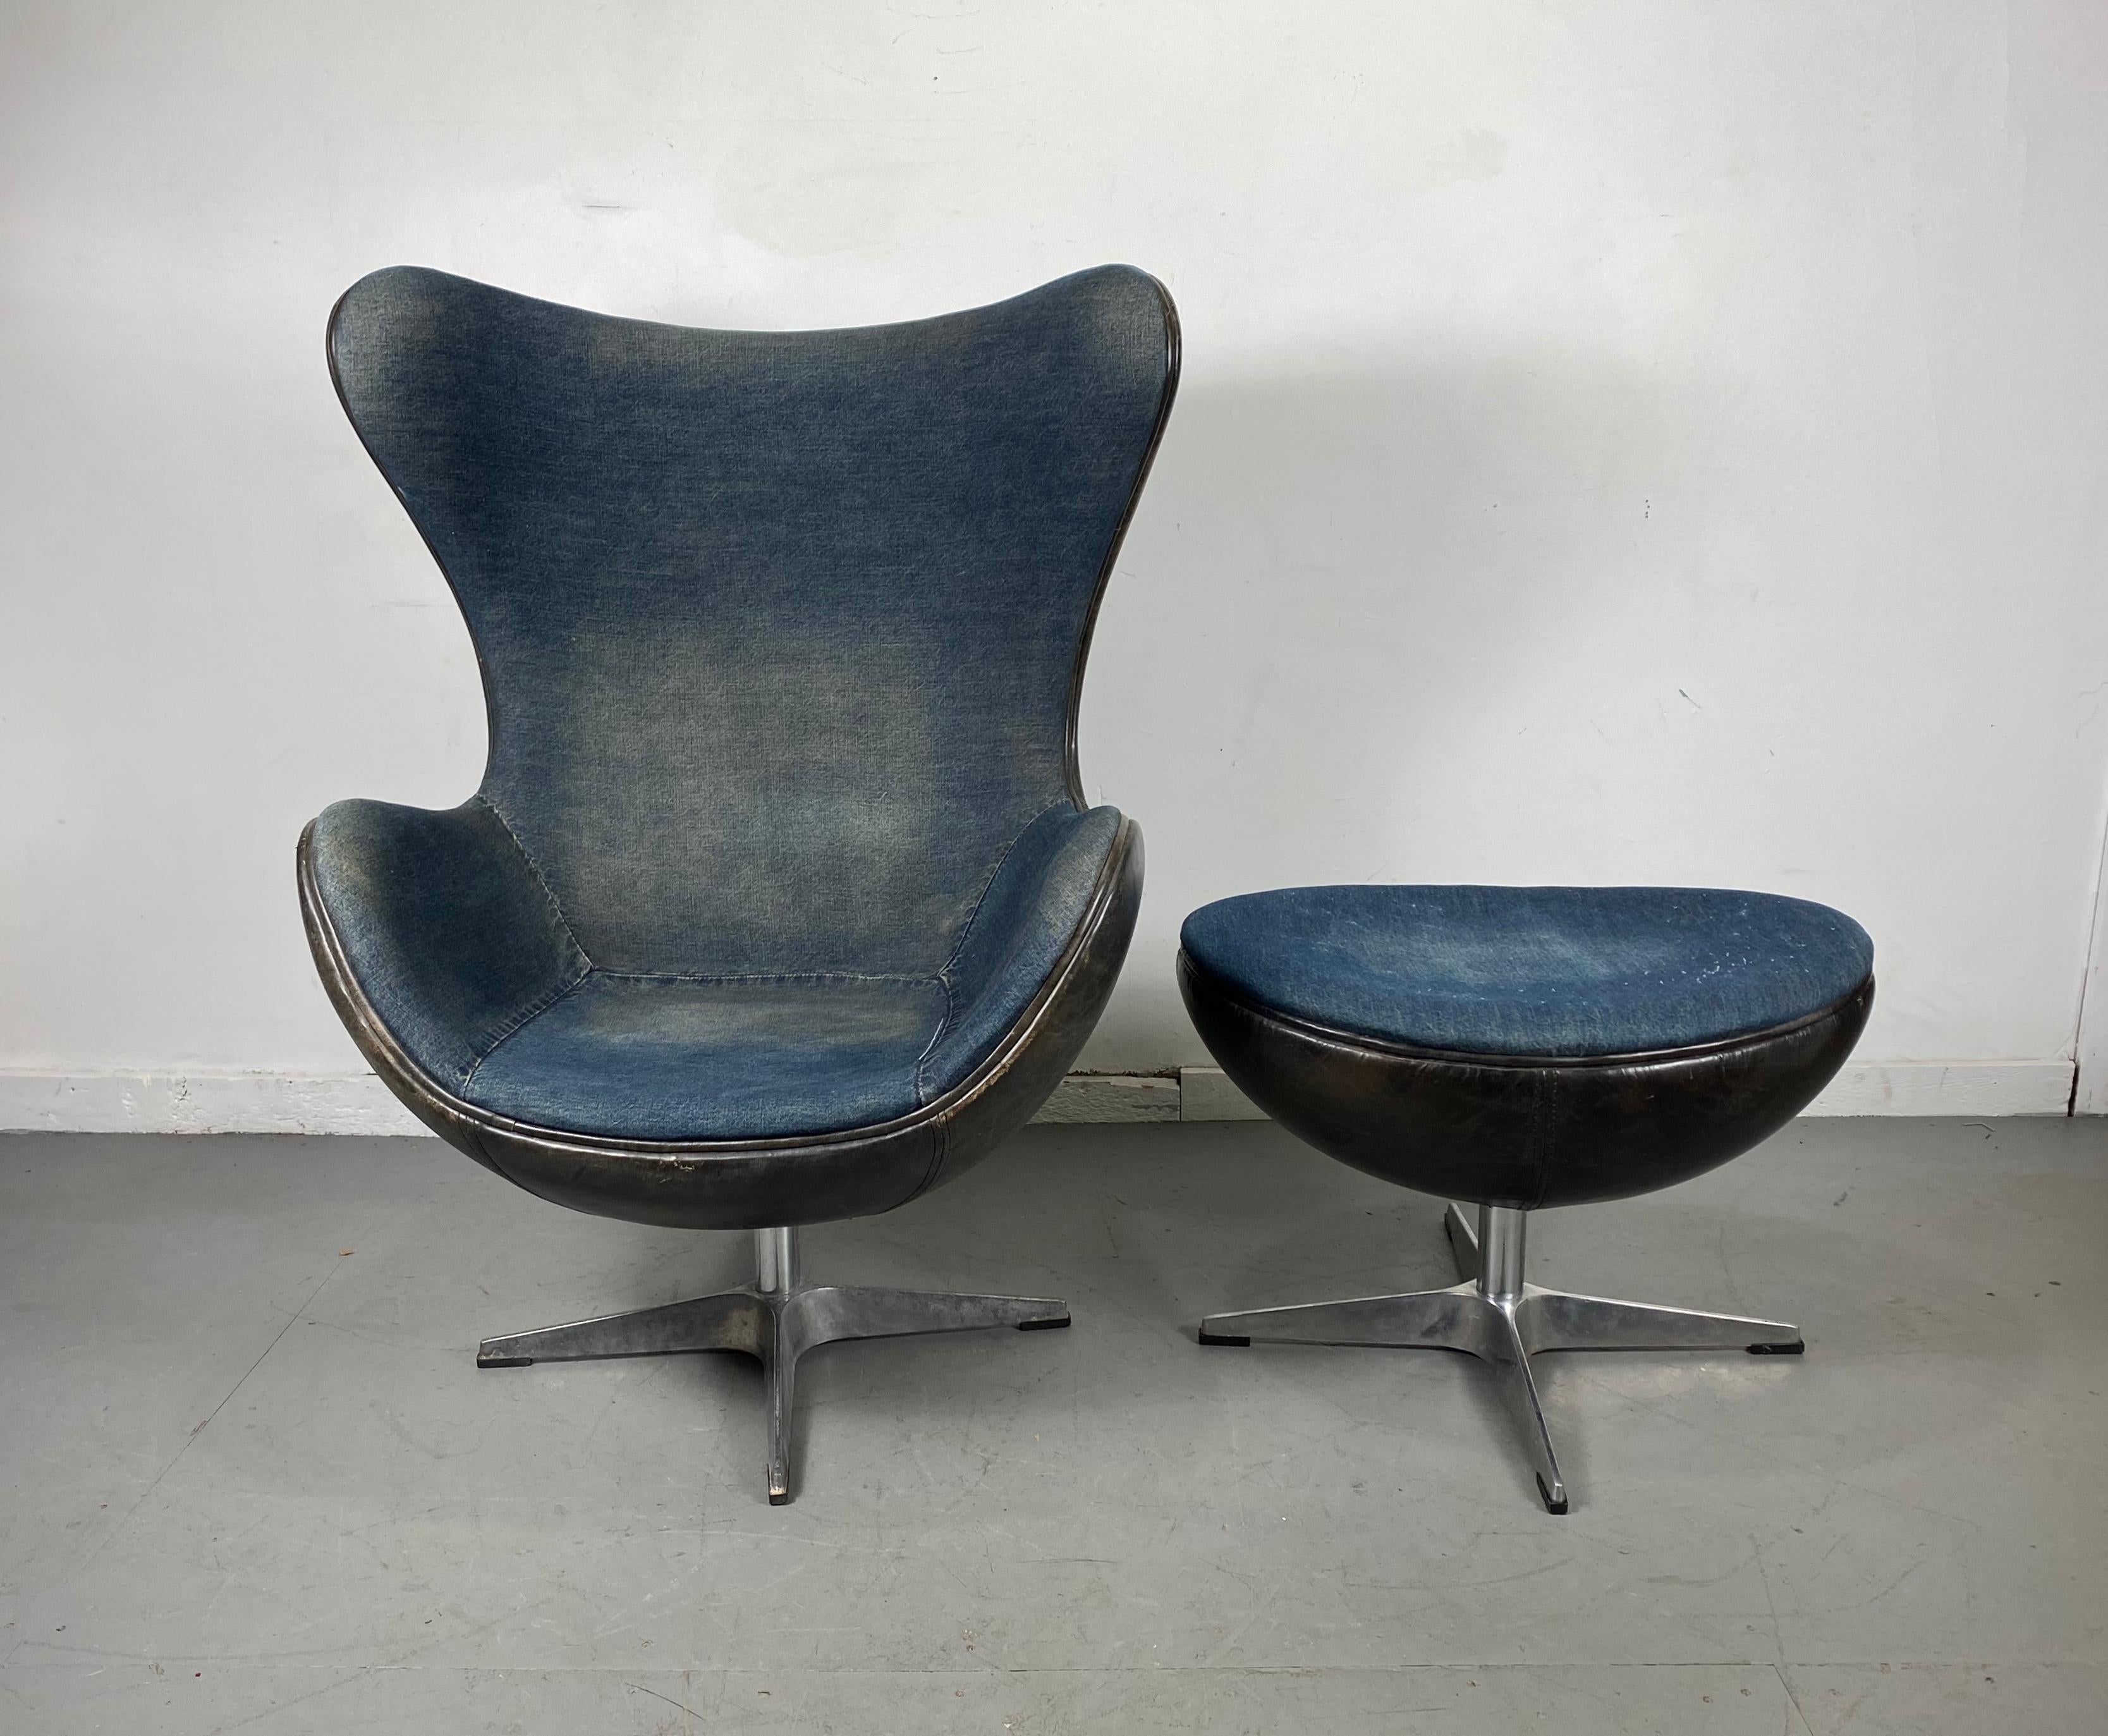 Mid-Century Modern Classic Egg Chair and Ottoman, Black Leather and Denim, After Arne Jacobsen